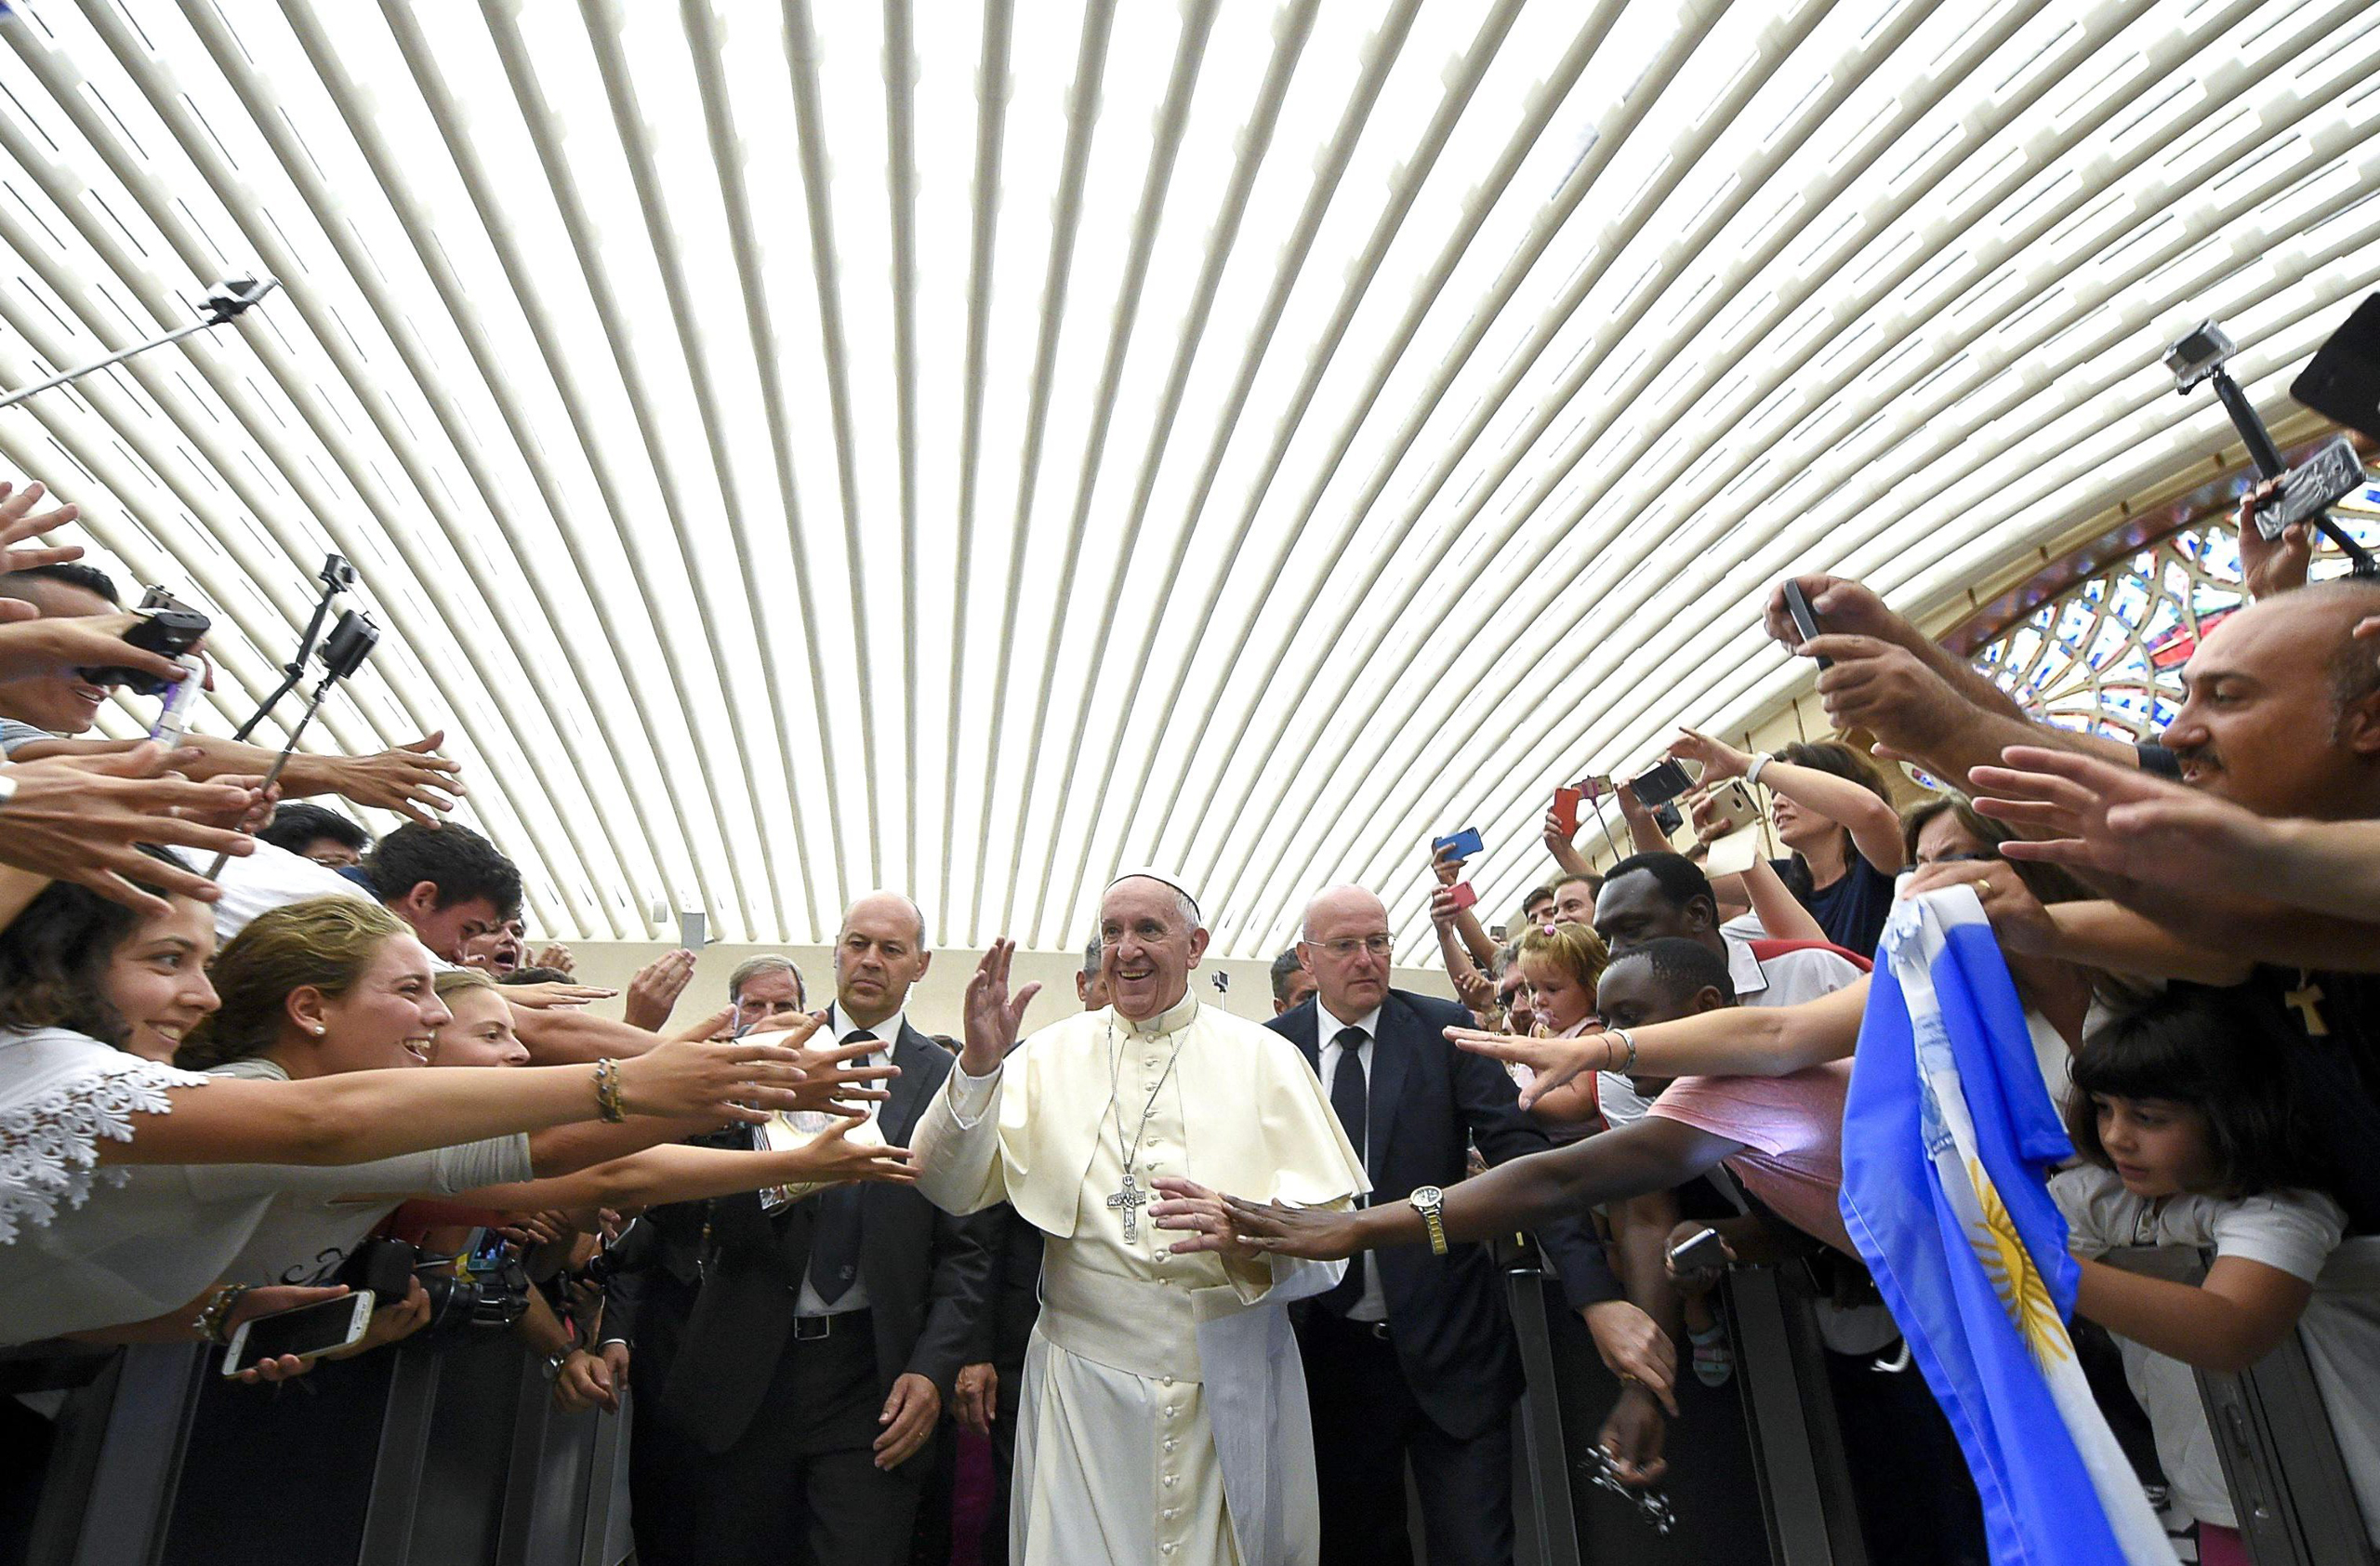 Pope Francis greeting faithful during his weekly general audience, in the Paul VI Hall, Vatican City, on Aug. 03, 2016. (L'osservatore Romano Press Office/EPA)